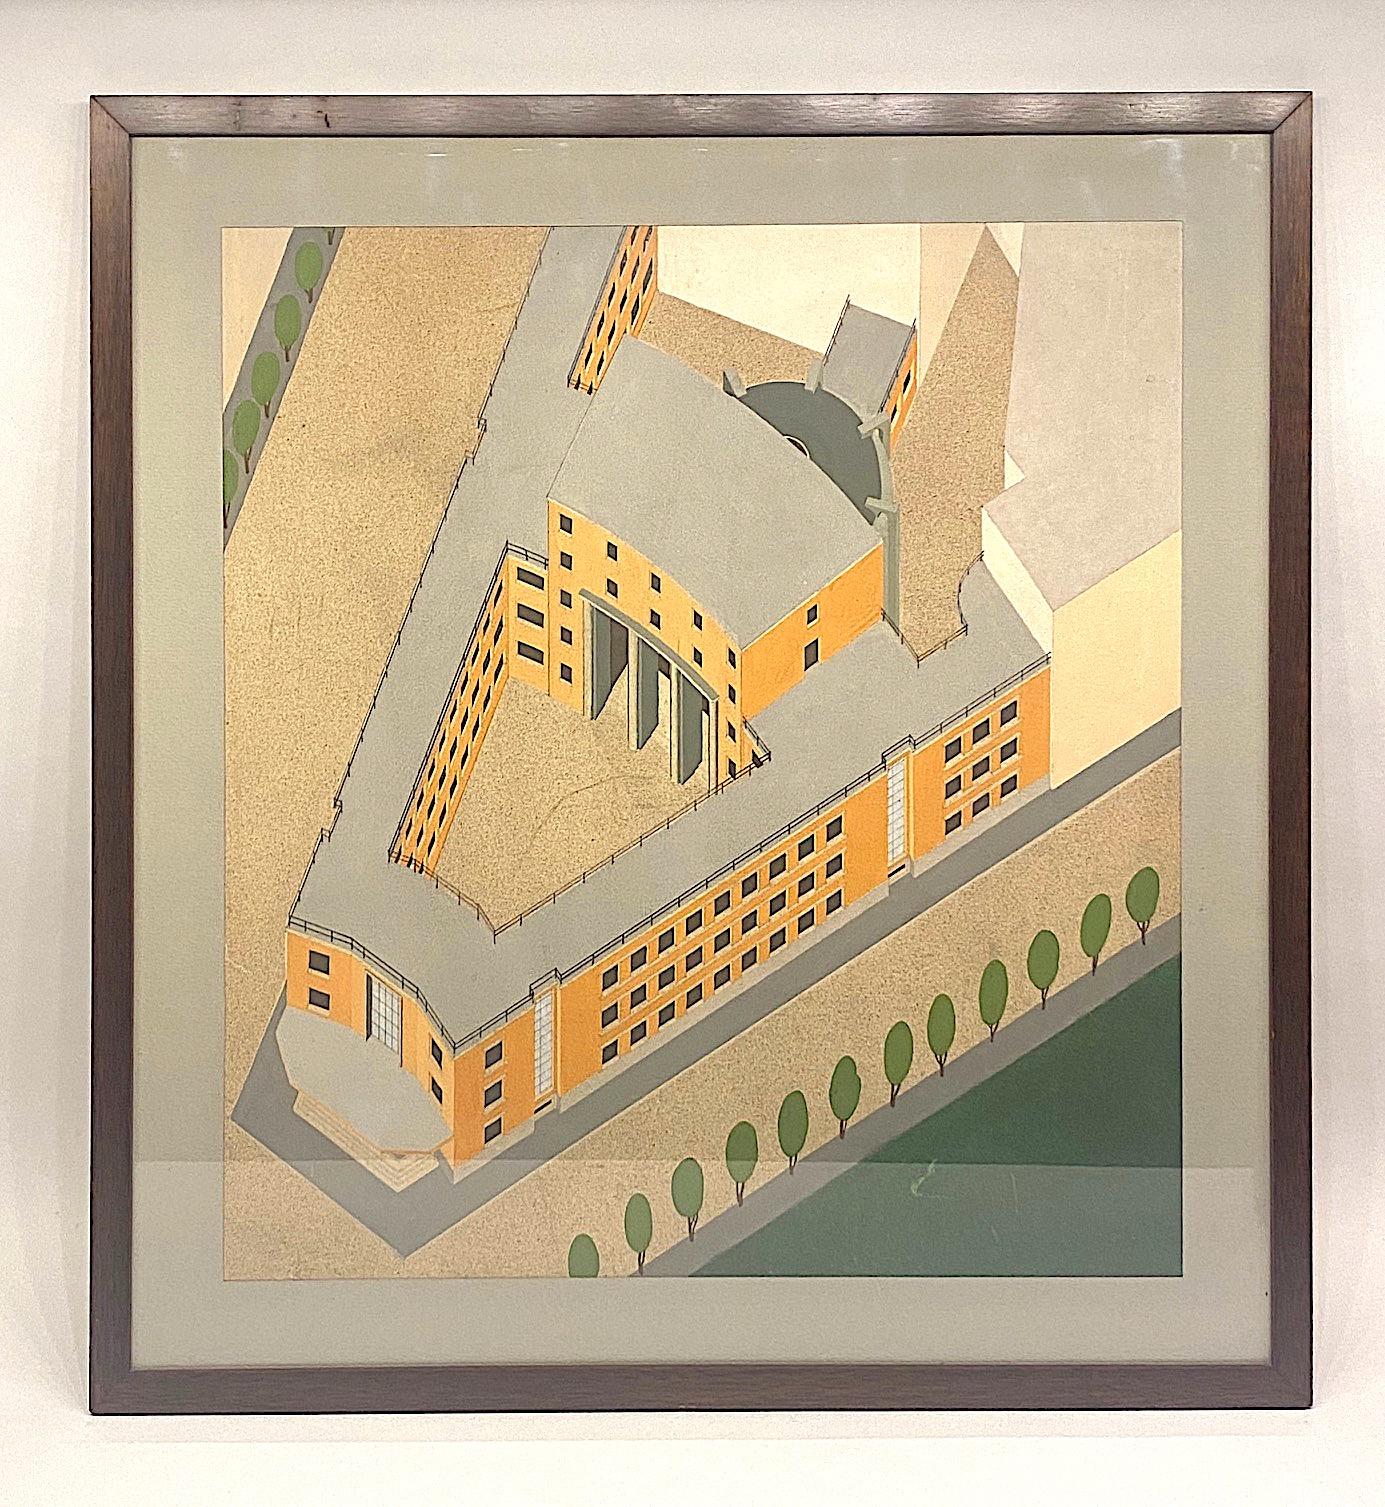 Hand drawn and painted rendering of the Italian Fascist building circa 1920-1930. The rendering shows a finished view from above of what became known as Casa del Fascio. This building is placed strategically designed for a wedge shape plot where two